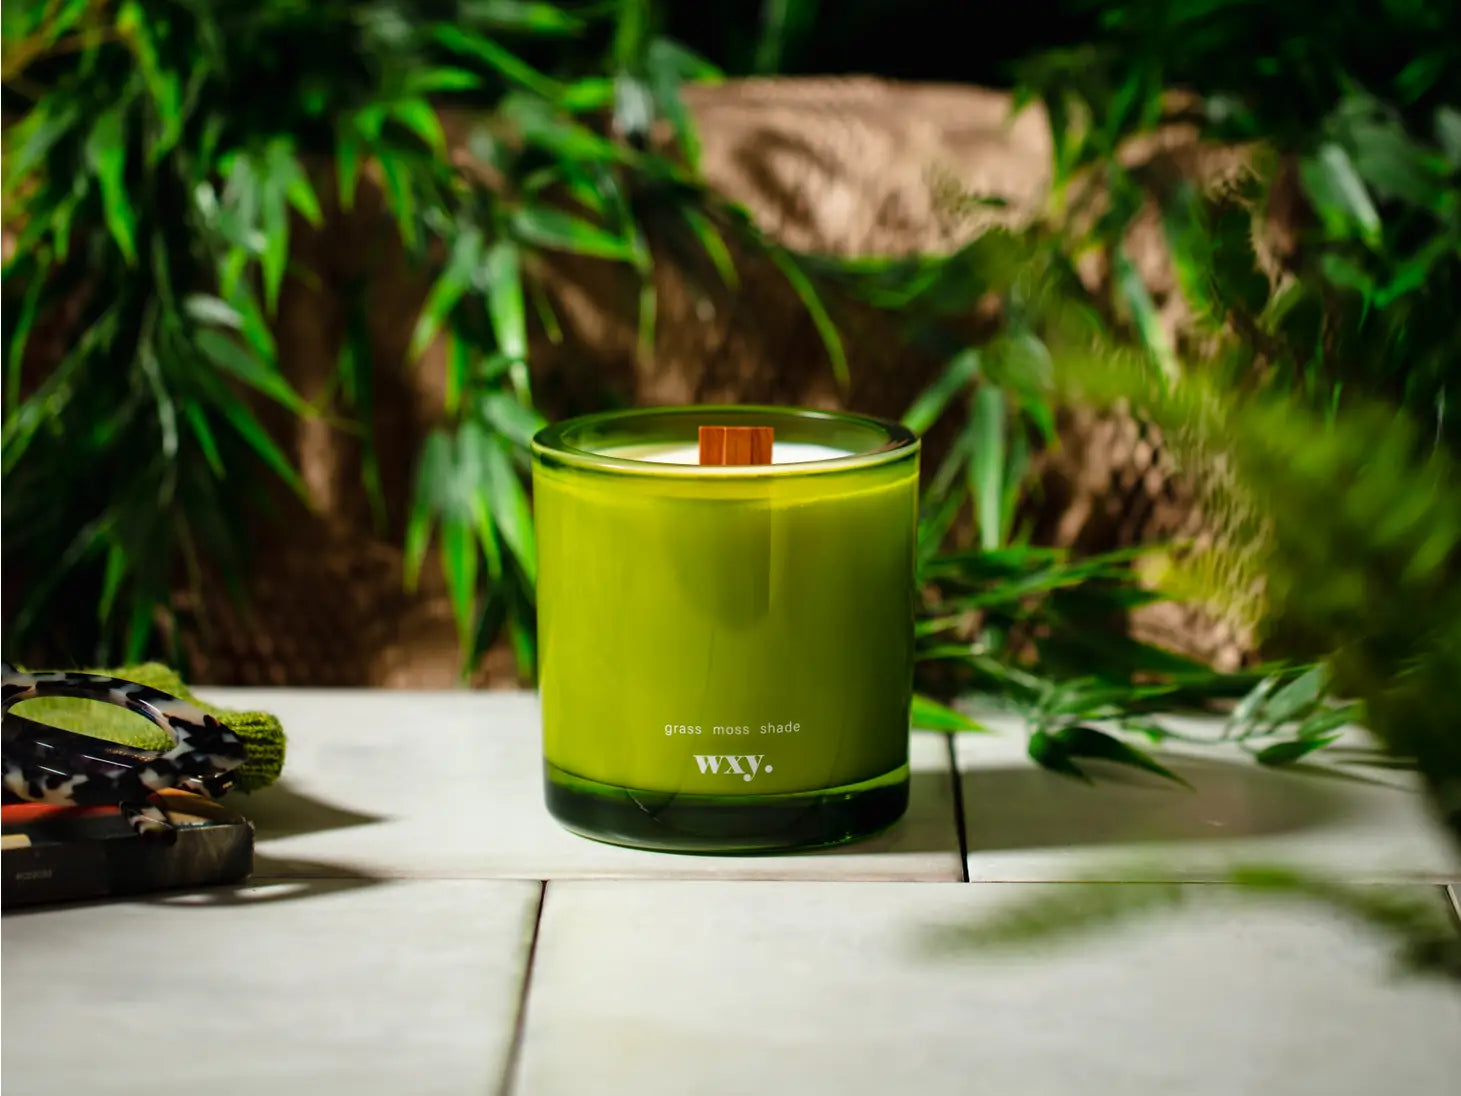 oam by wxy. - 12.5oz Candle - Grass Moss Shade.  Interior photo